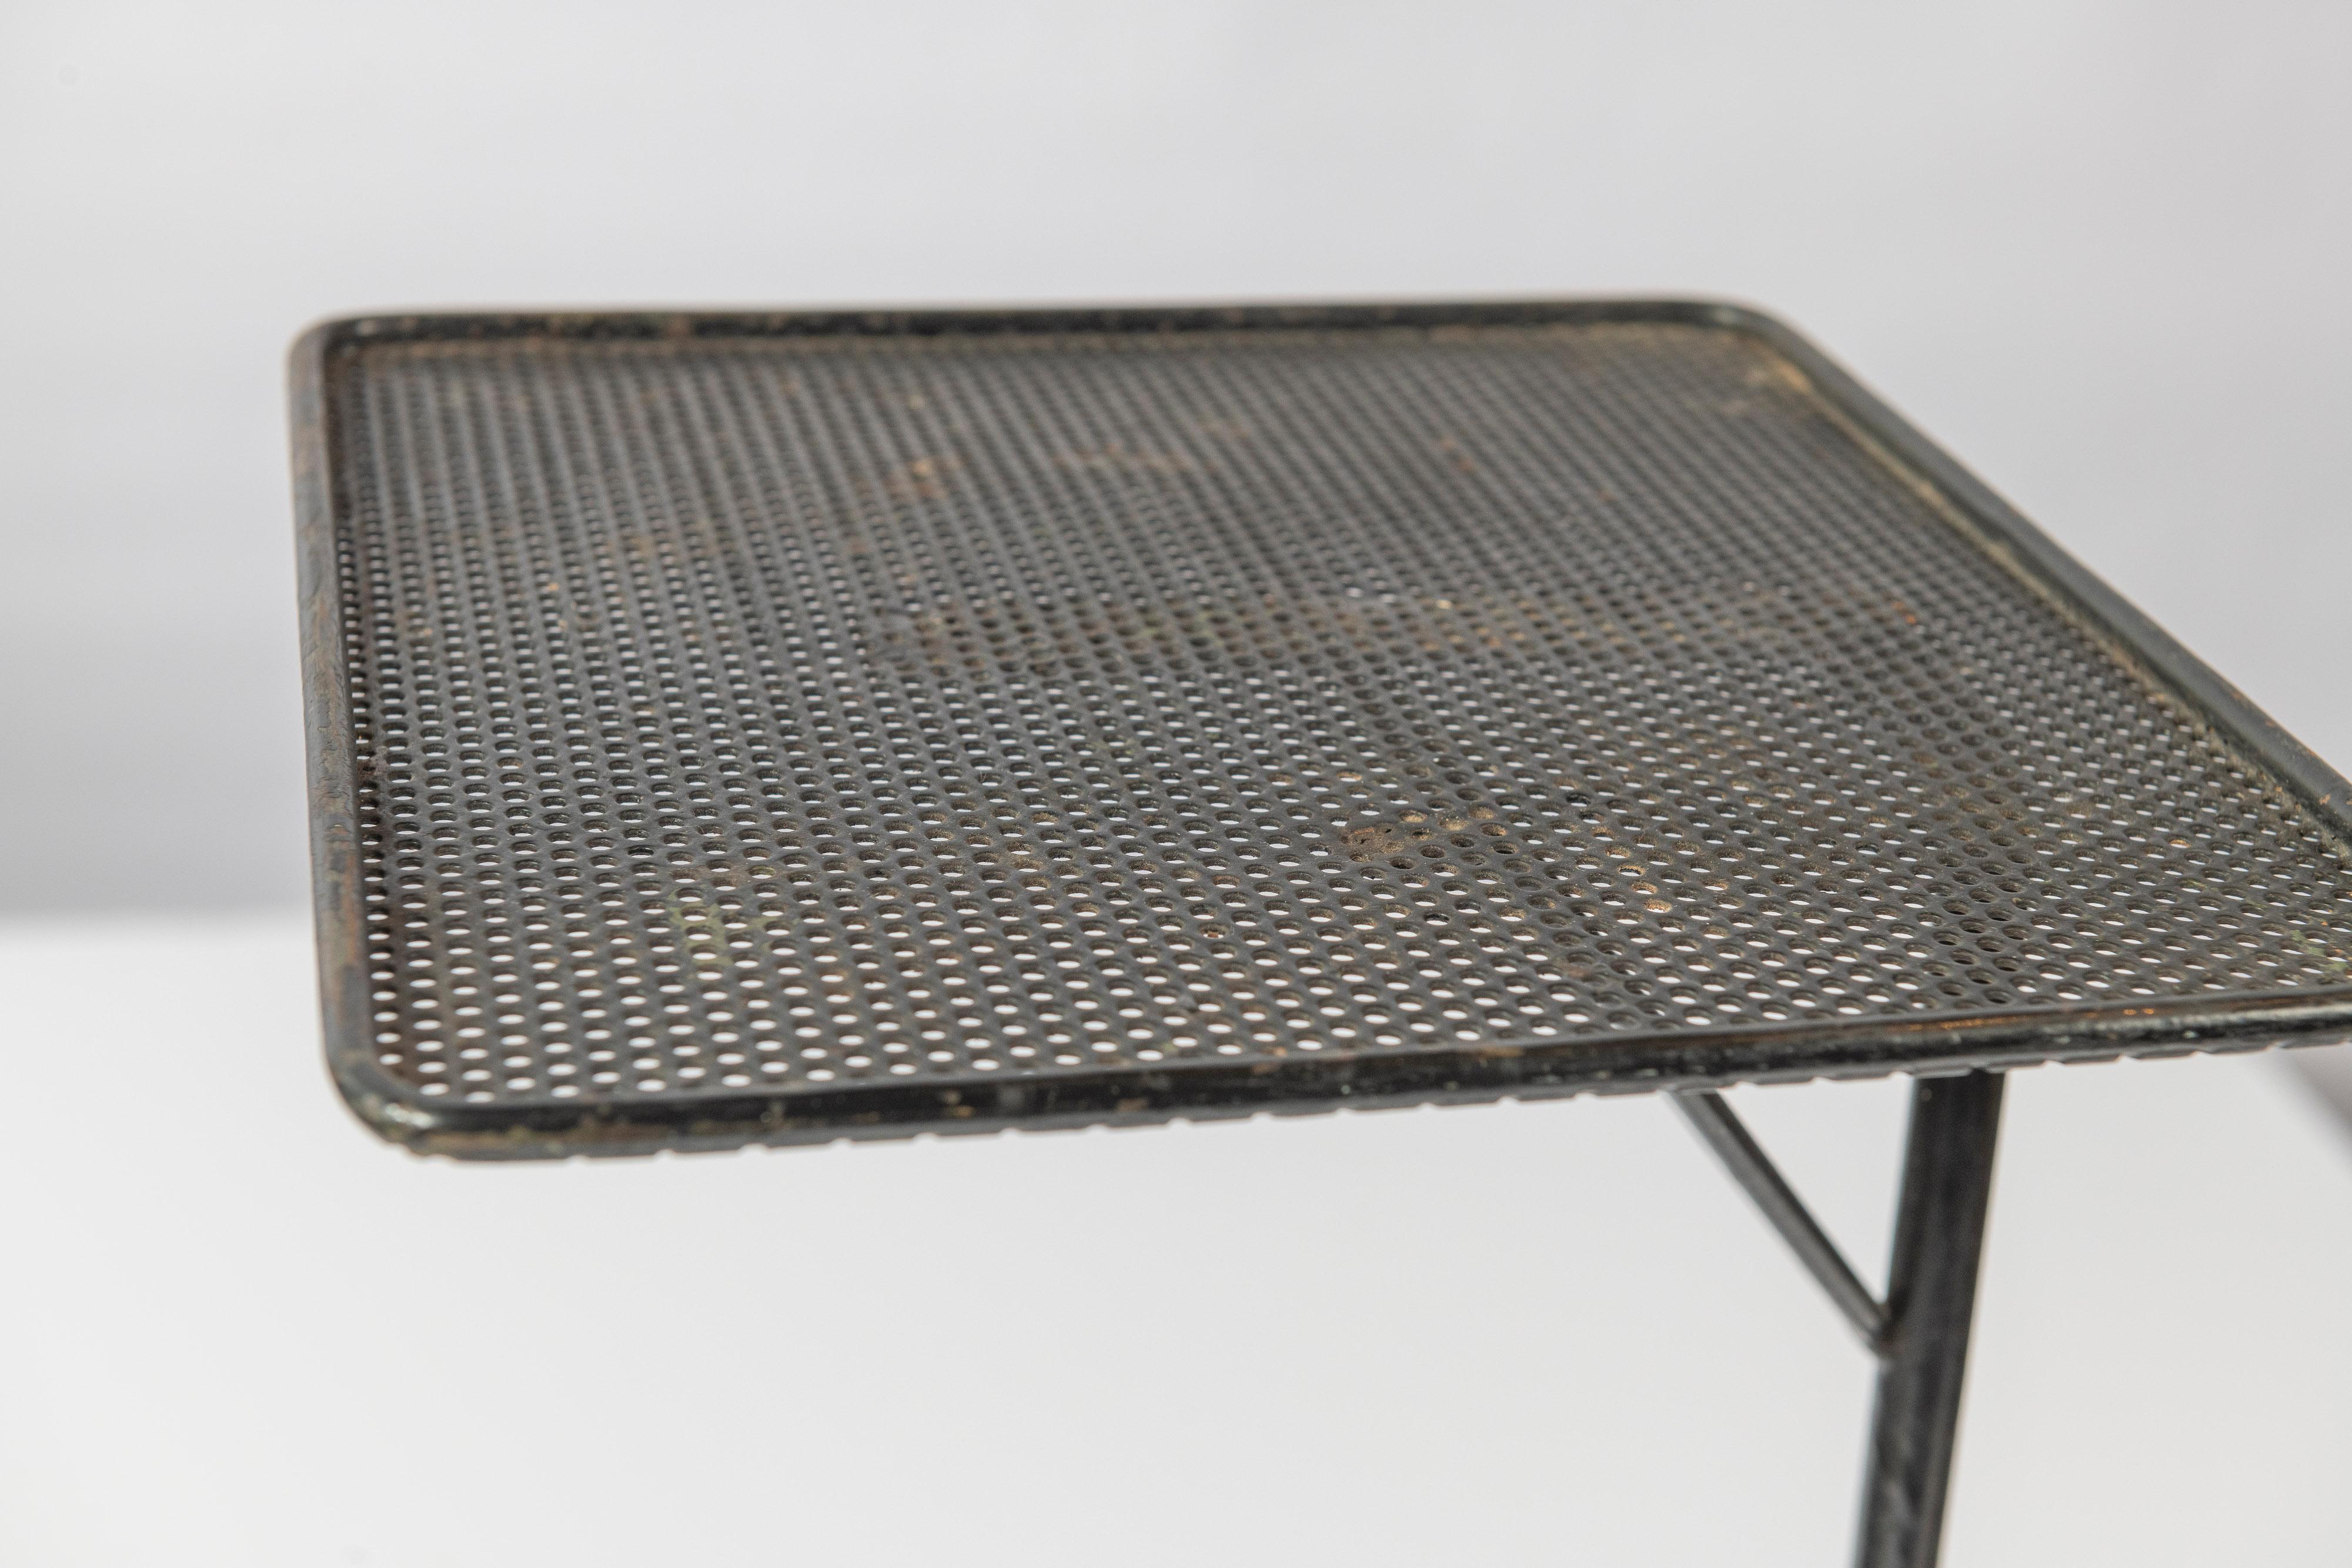 This vintage Mid-Century Modern side or telephone table in perforated metal with shelf is quite functional. In good condition, this small piece can serve as a side table, plant stand, telephone stand, magazine/book storage, bedside table and beyond.